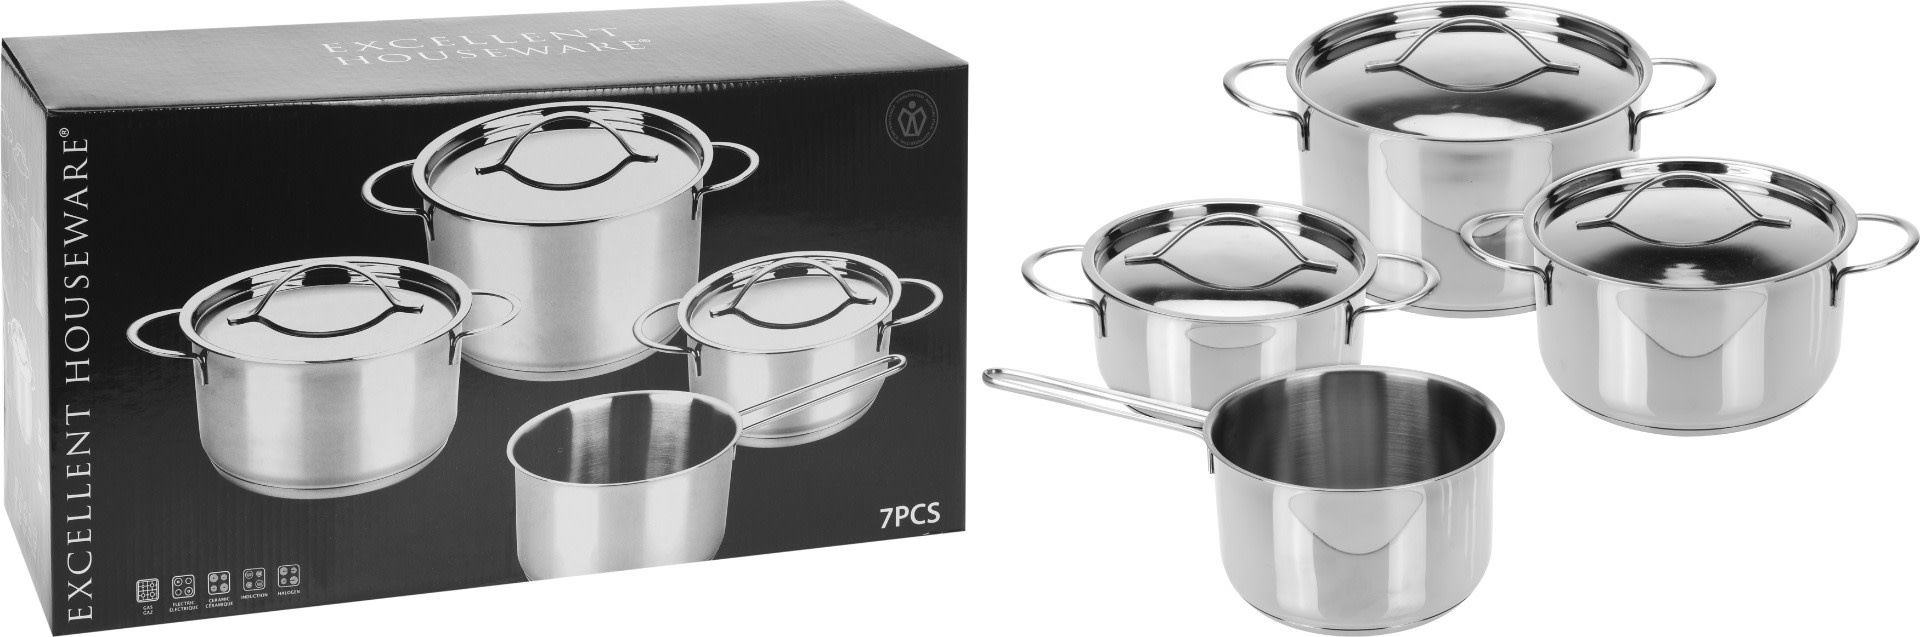 Cooking pans - Stainless - 7pcs